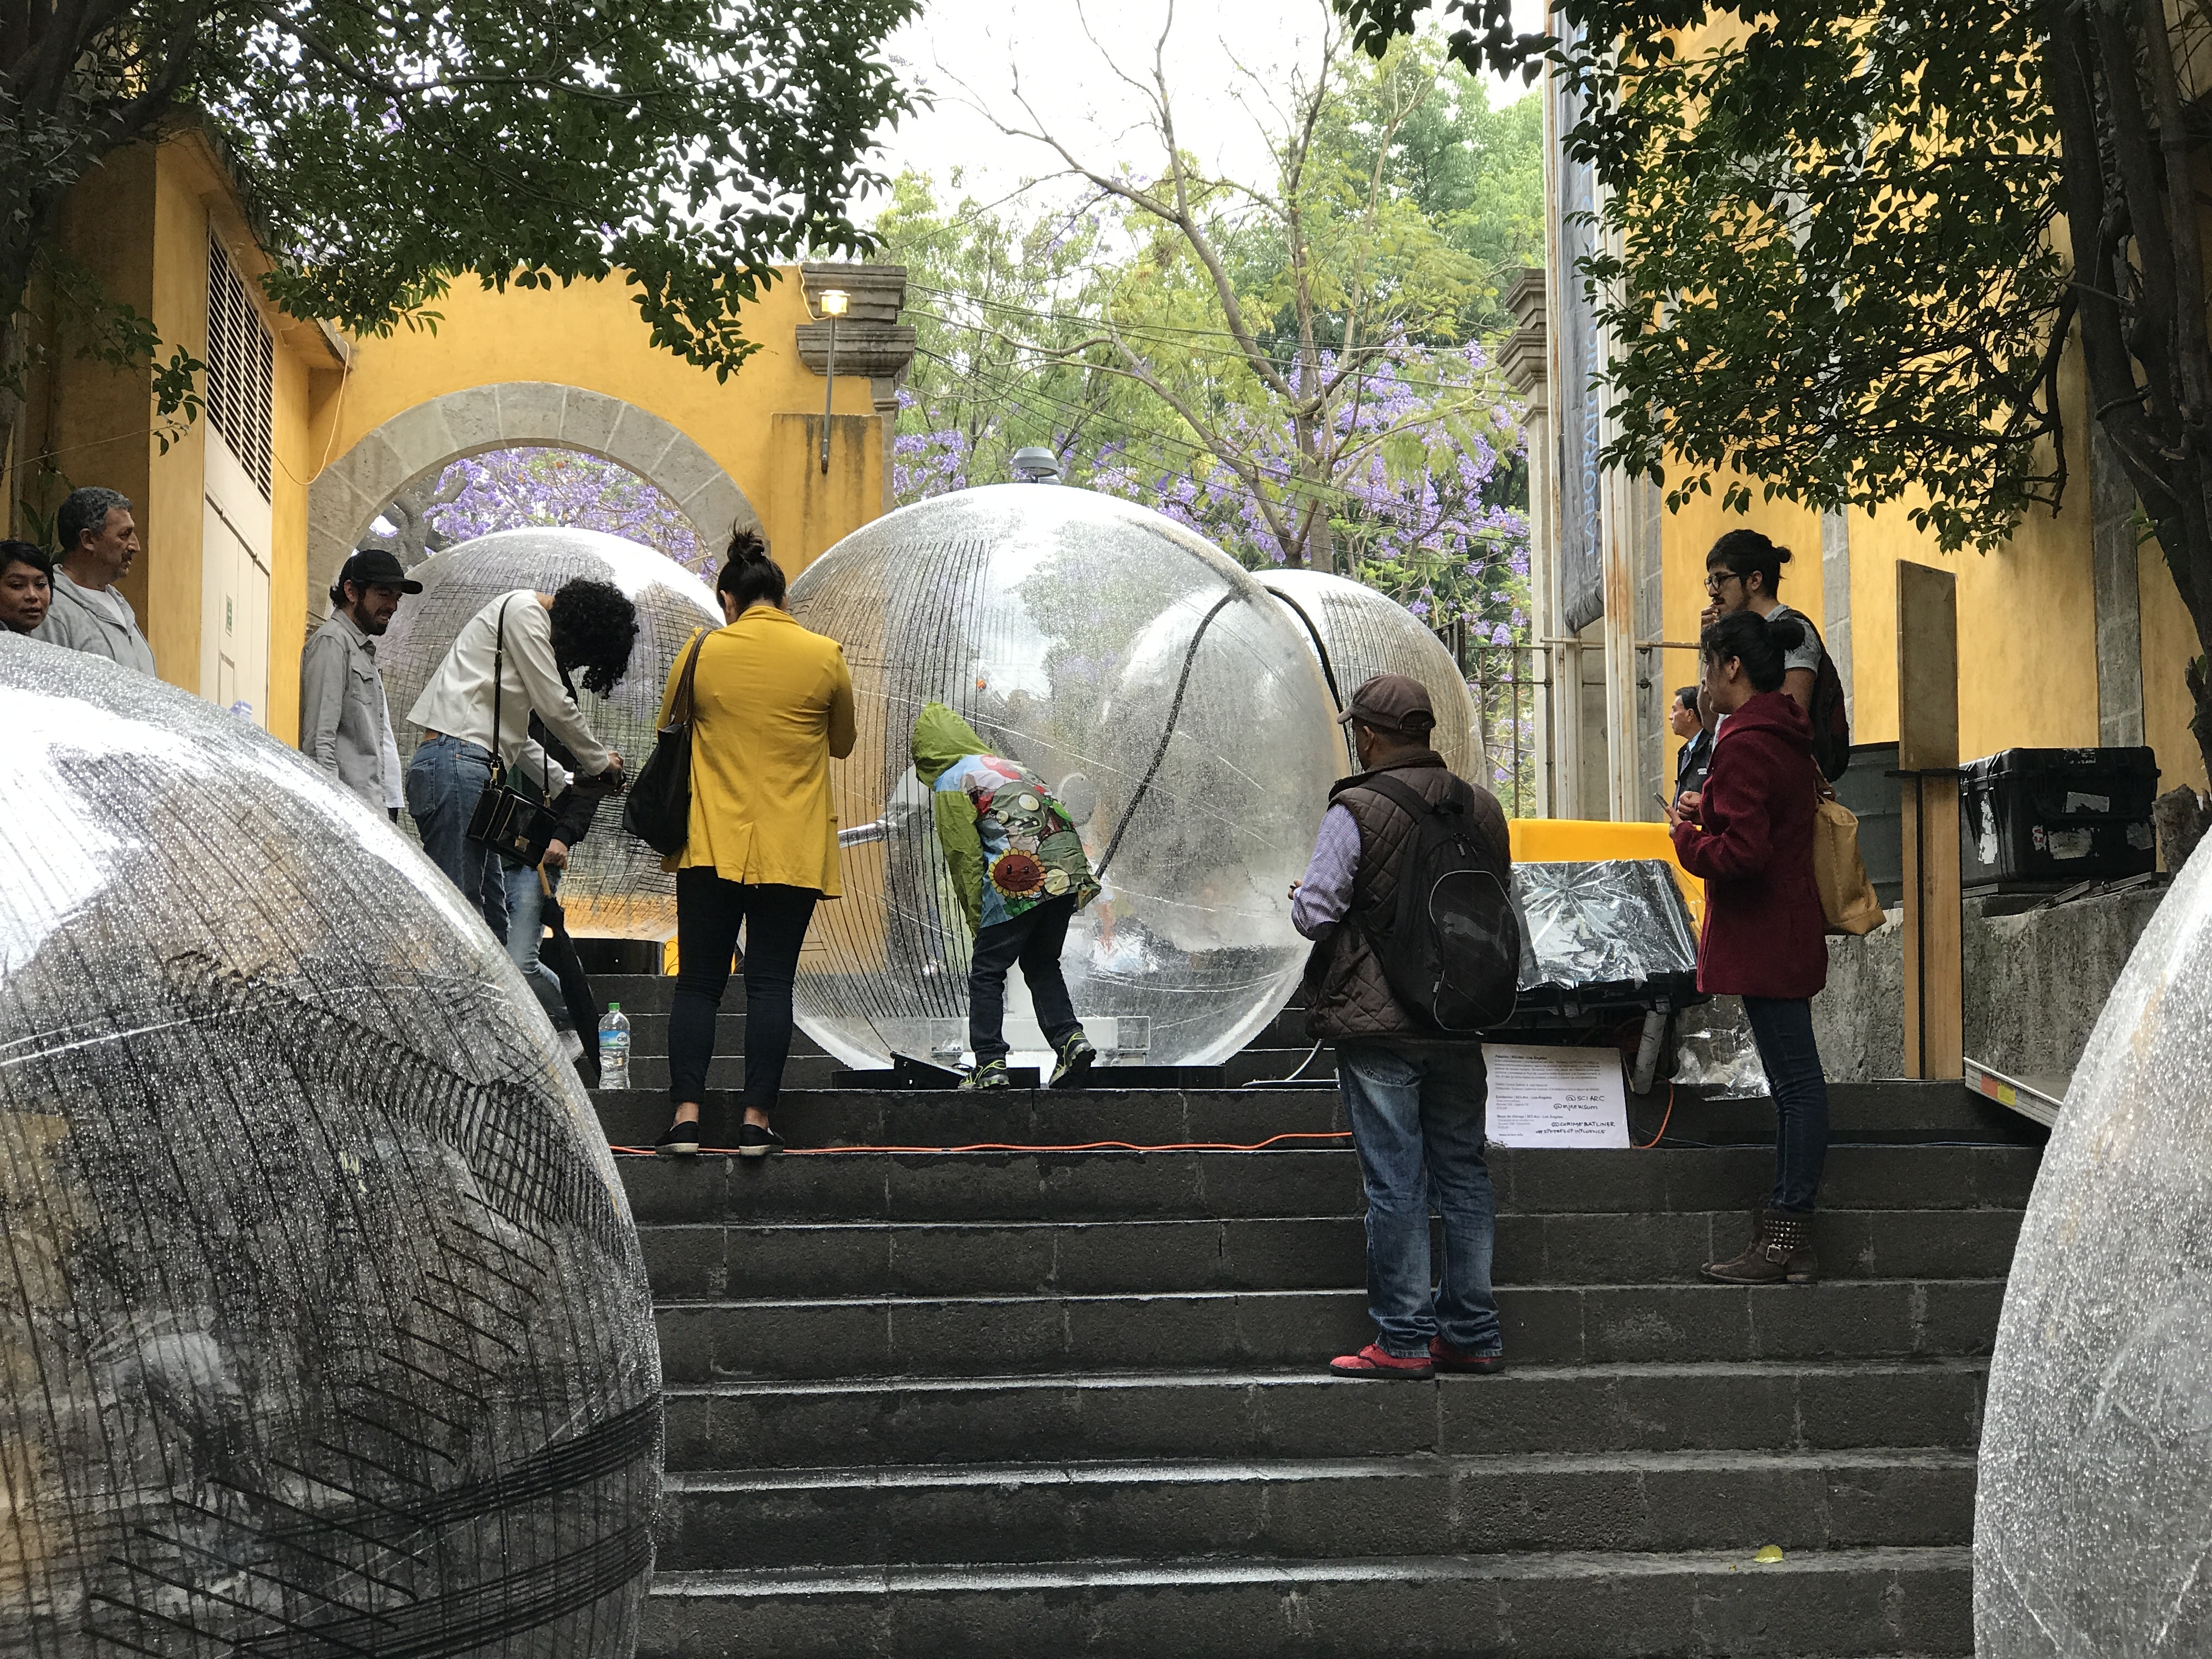 Architecture enthusiast admiring a robitic arm within clear sphere balls